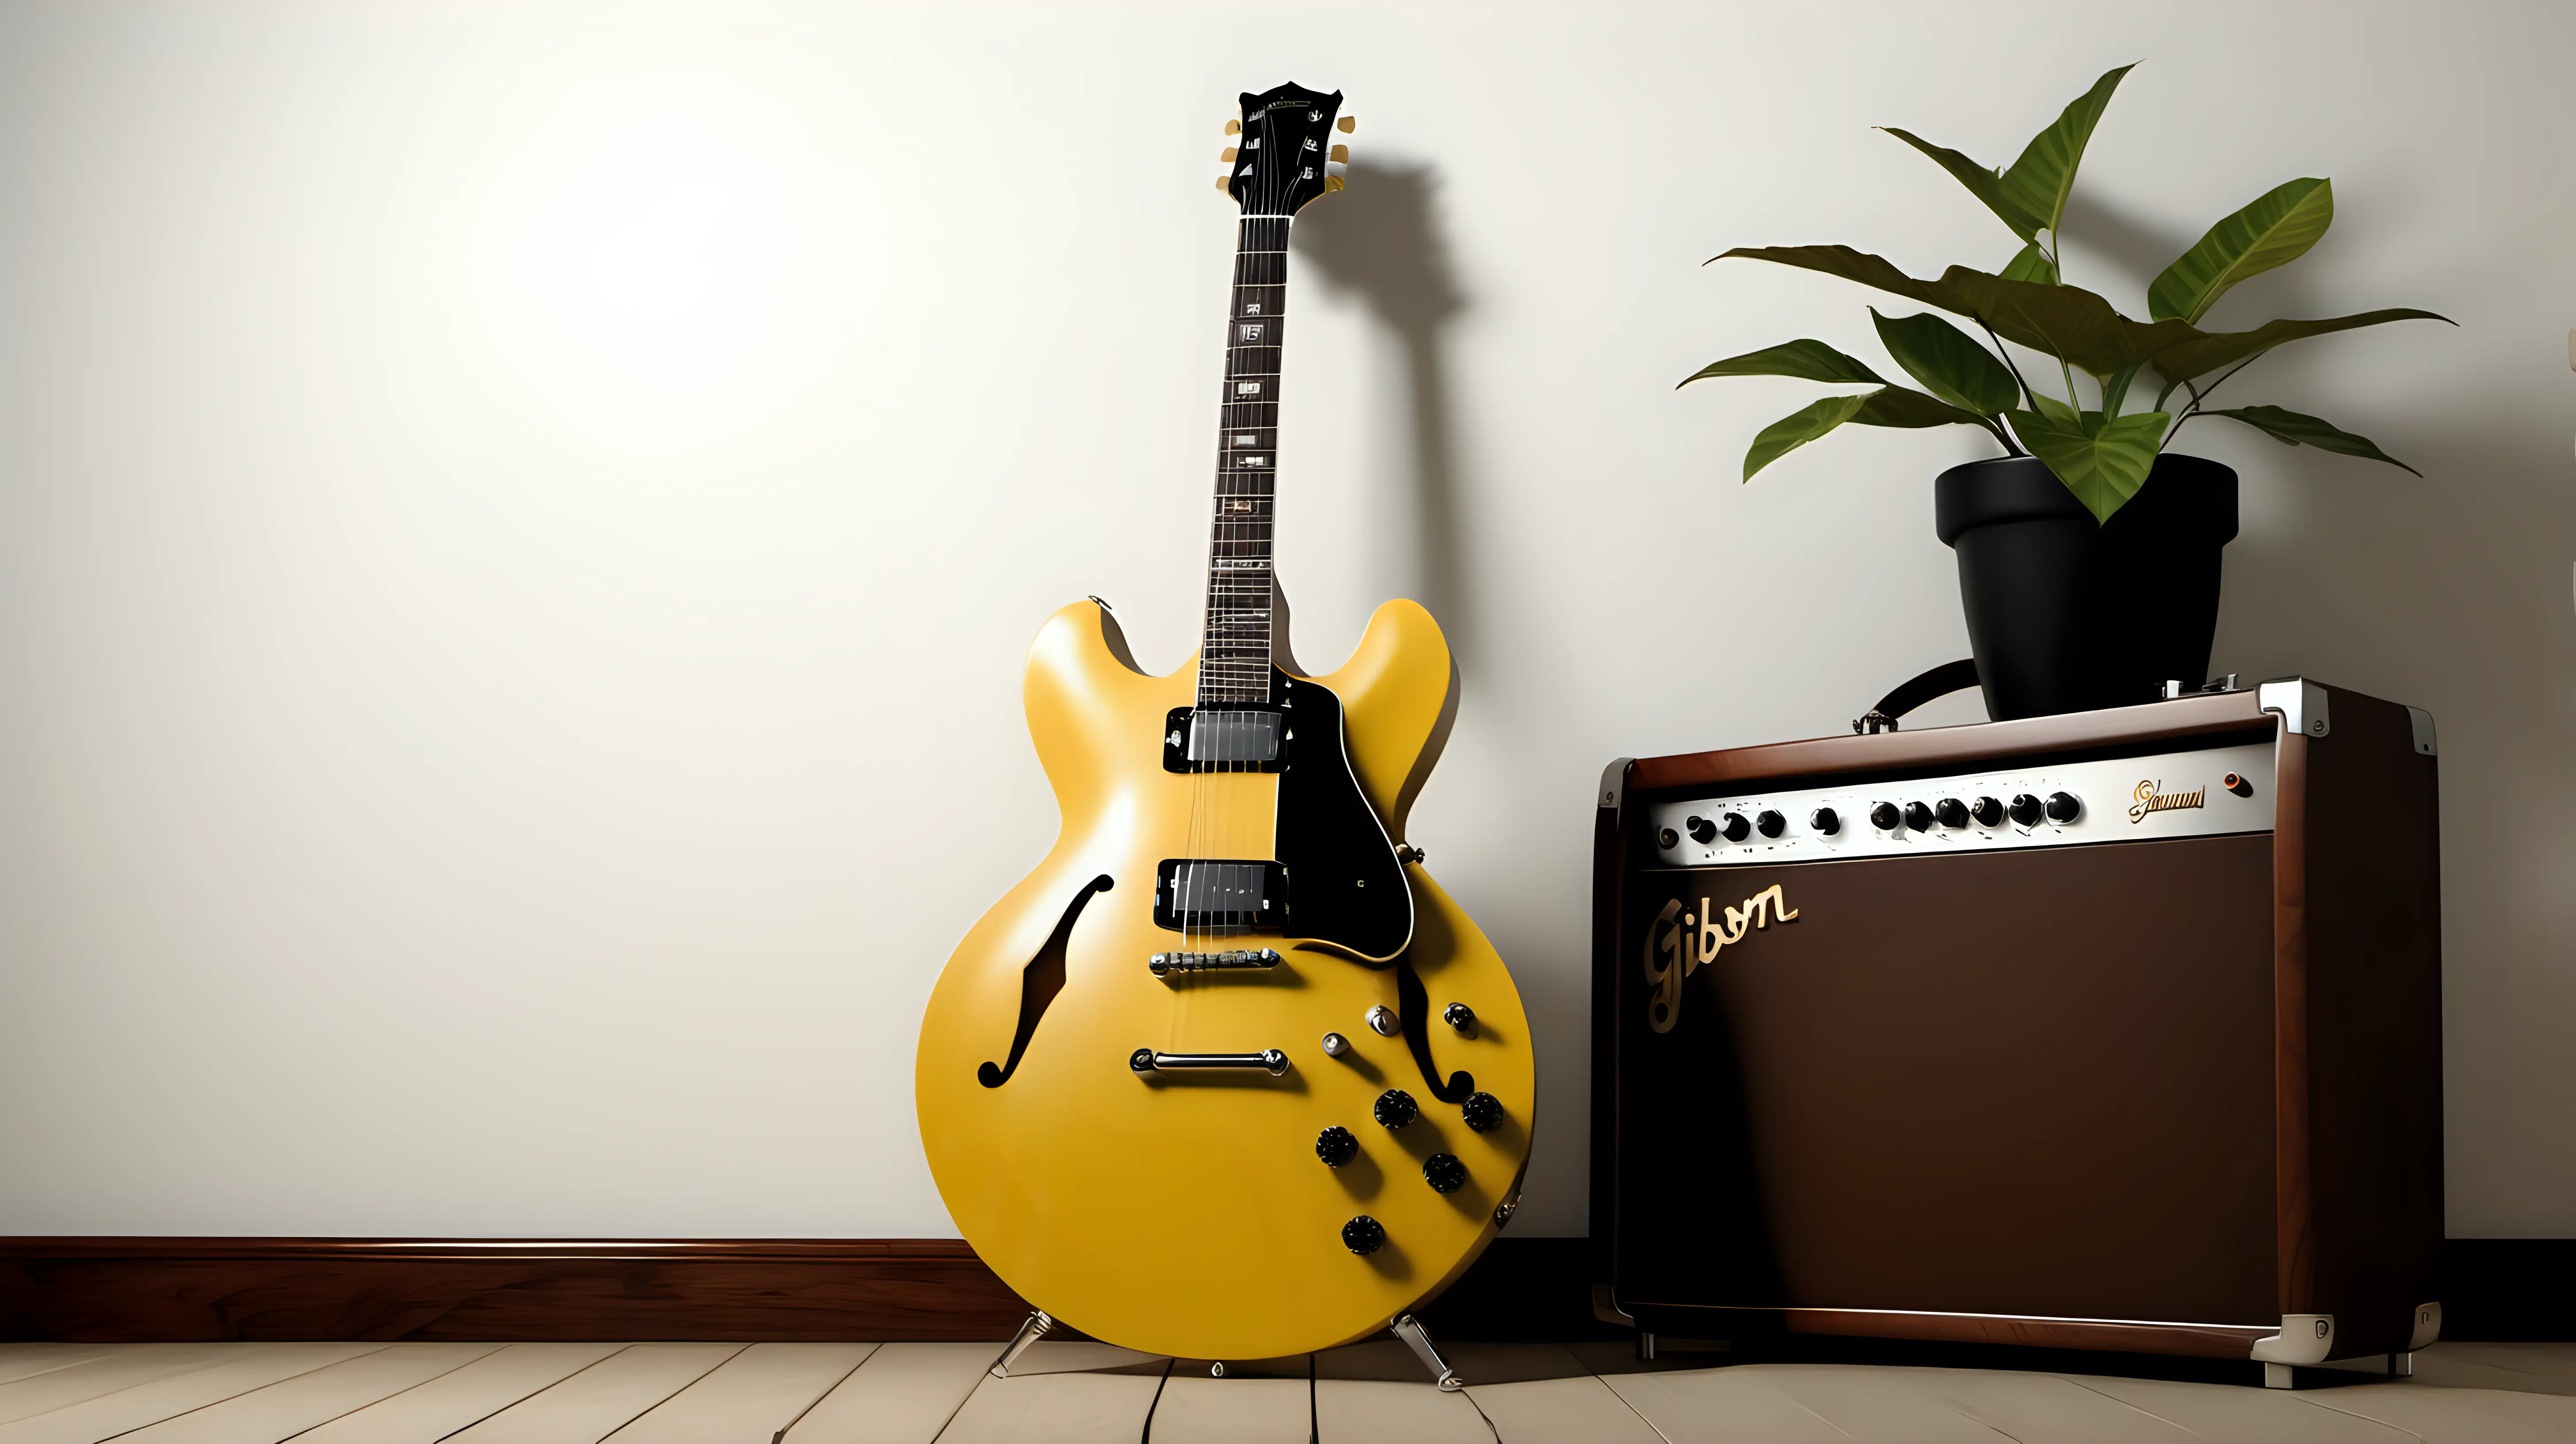 Realistic Gibson ES335 Light Yellow Guitar Against Wooden White Wall